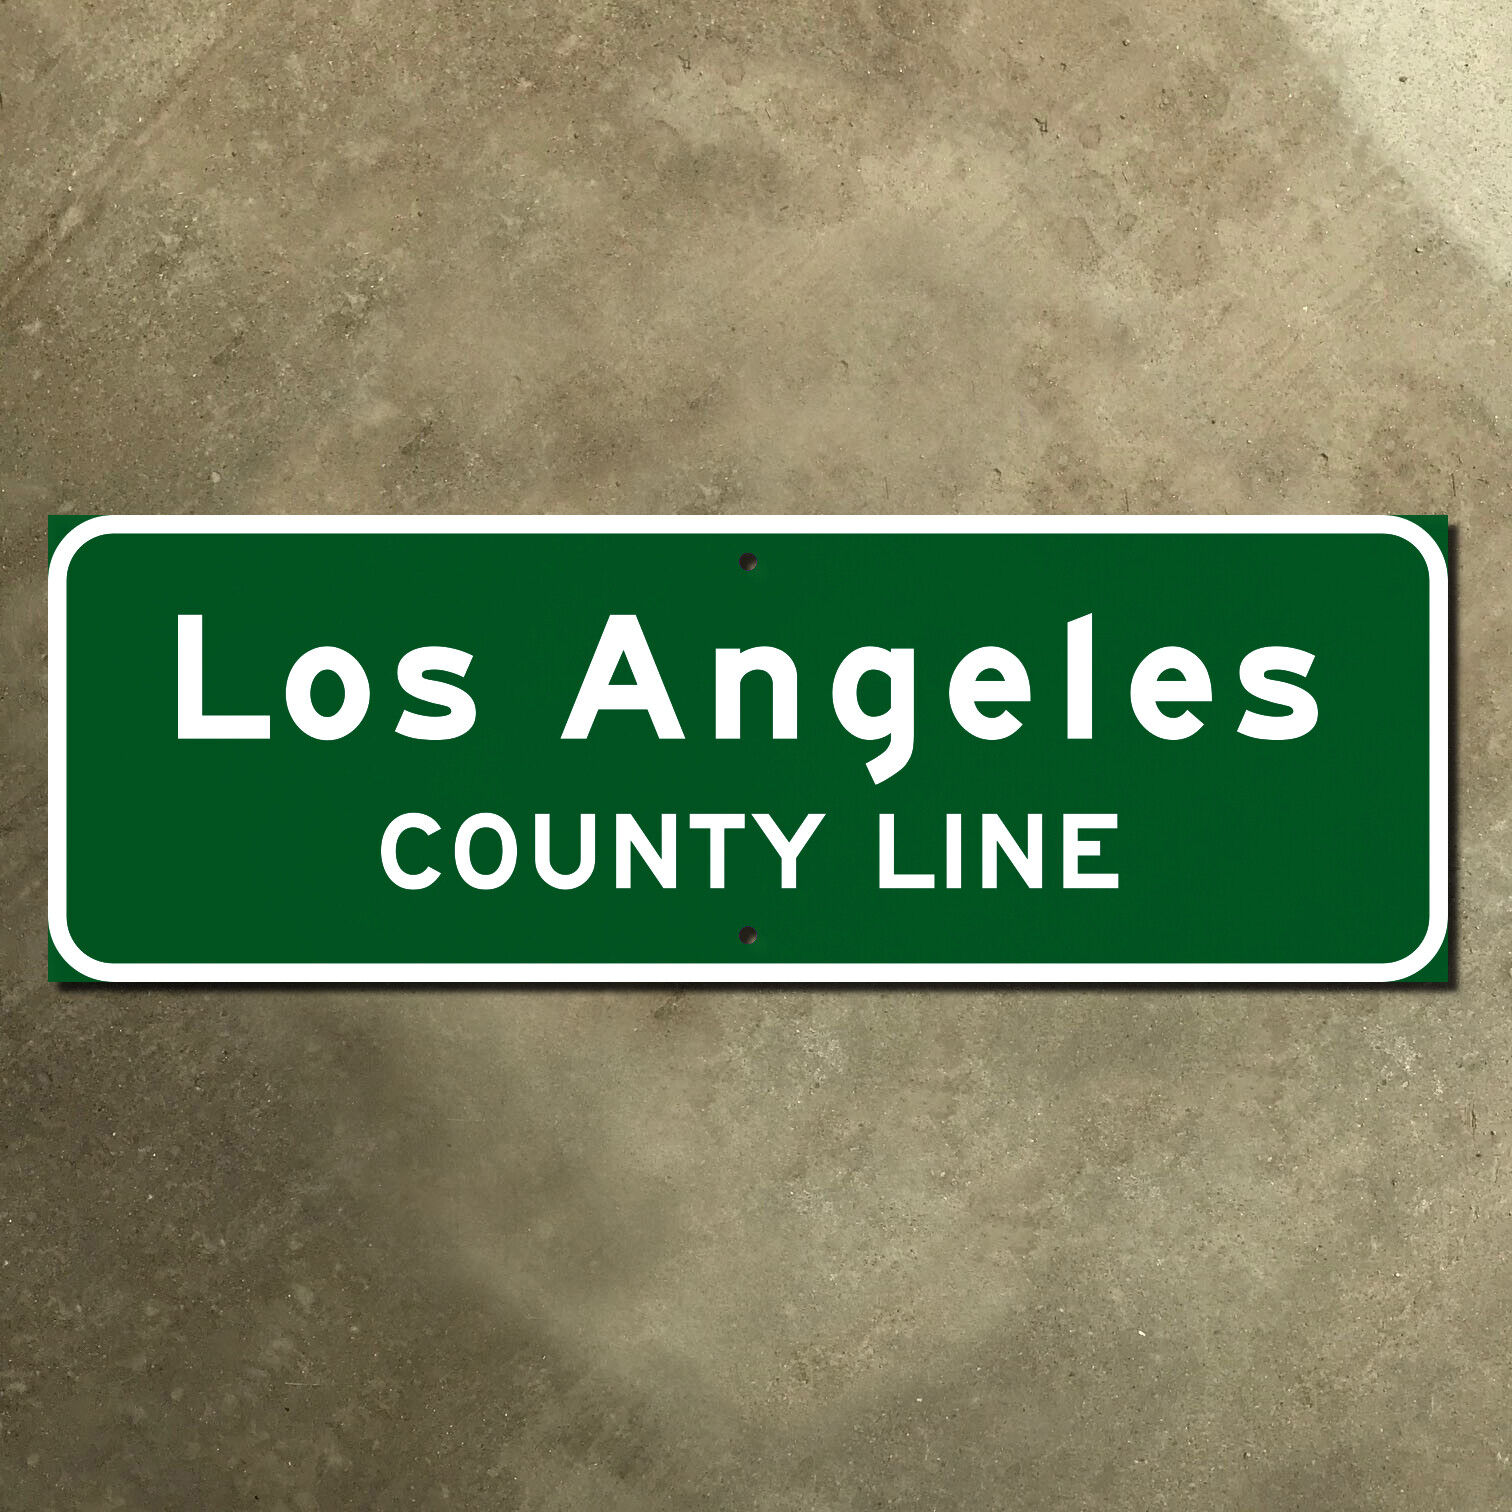 Los Angeles California county line highway road sign green freeway 1959 21x7